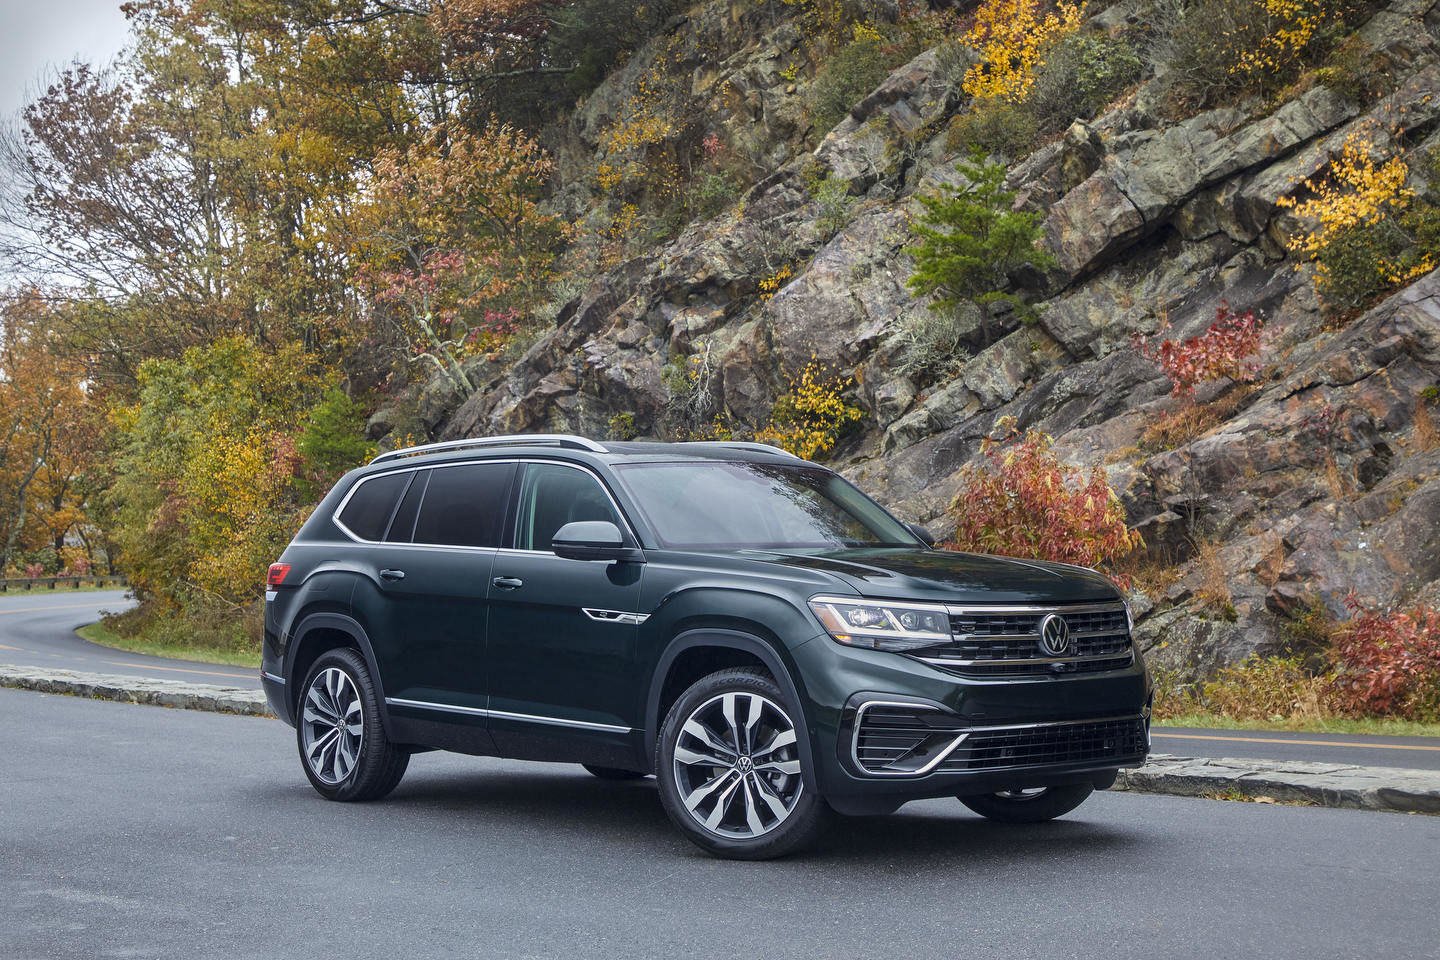 2022 Volkswagen Atlas vs. 2022 Nissan Pathfinder: More Performance and Style